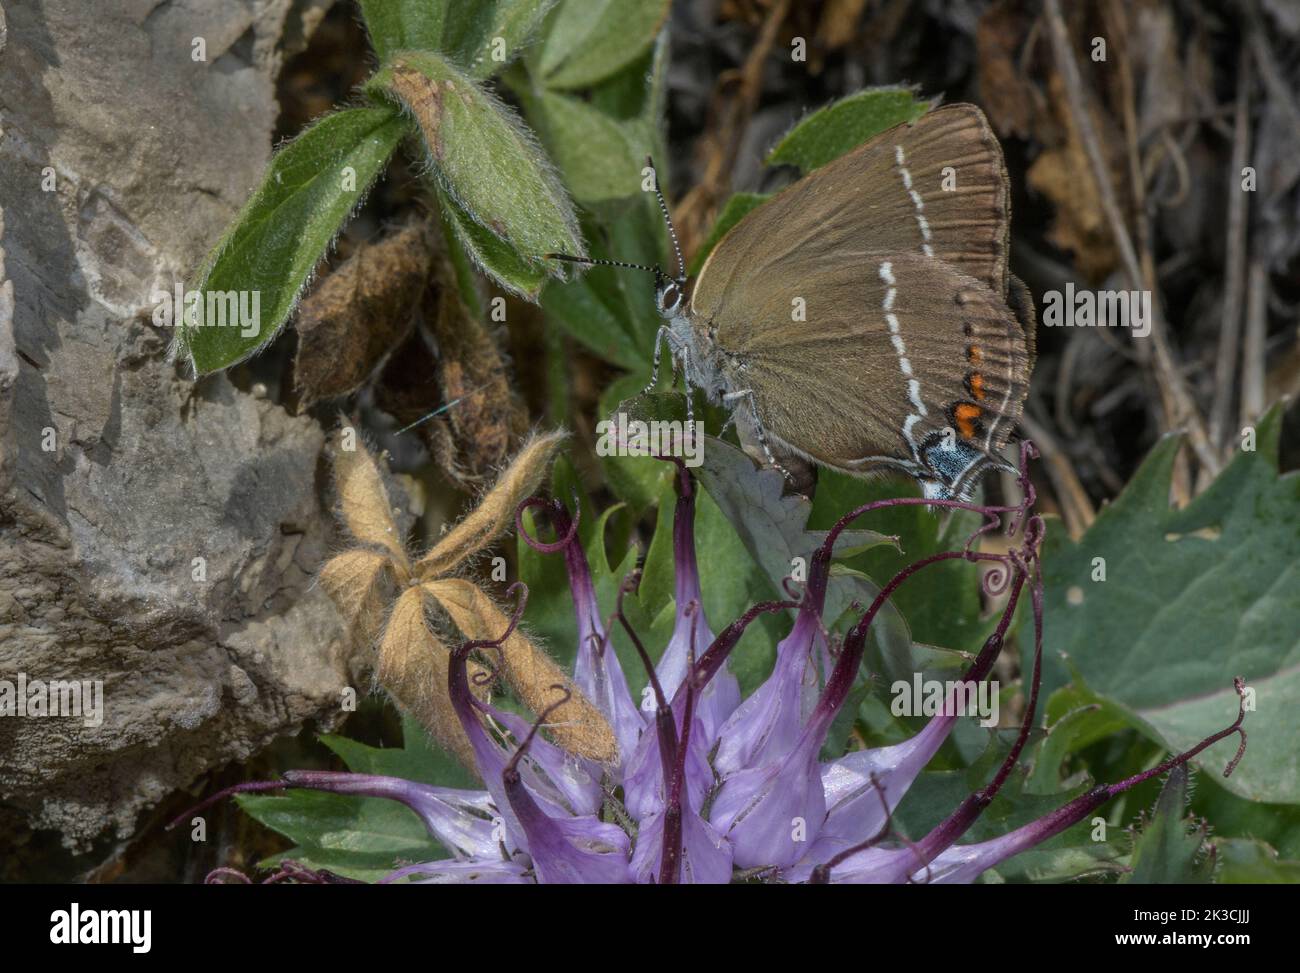 Blue-spot Hairstreak Butterfly, Satyrium spini, on Tufted horned rampion,  Physoplexis comosa, in the Italian Alps. Stock Photo